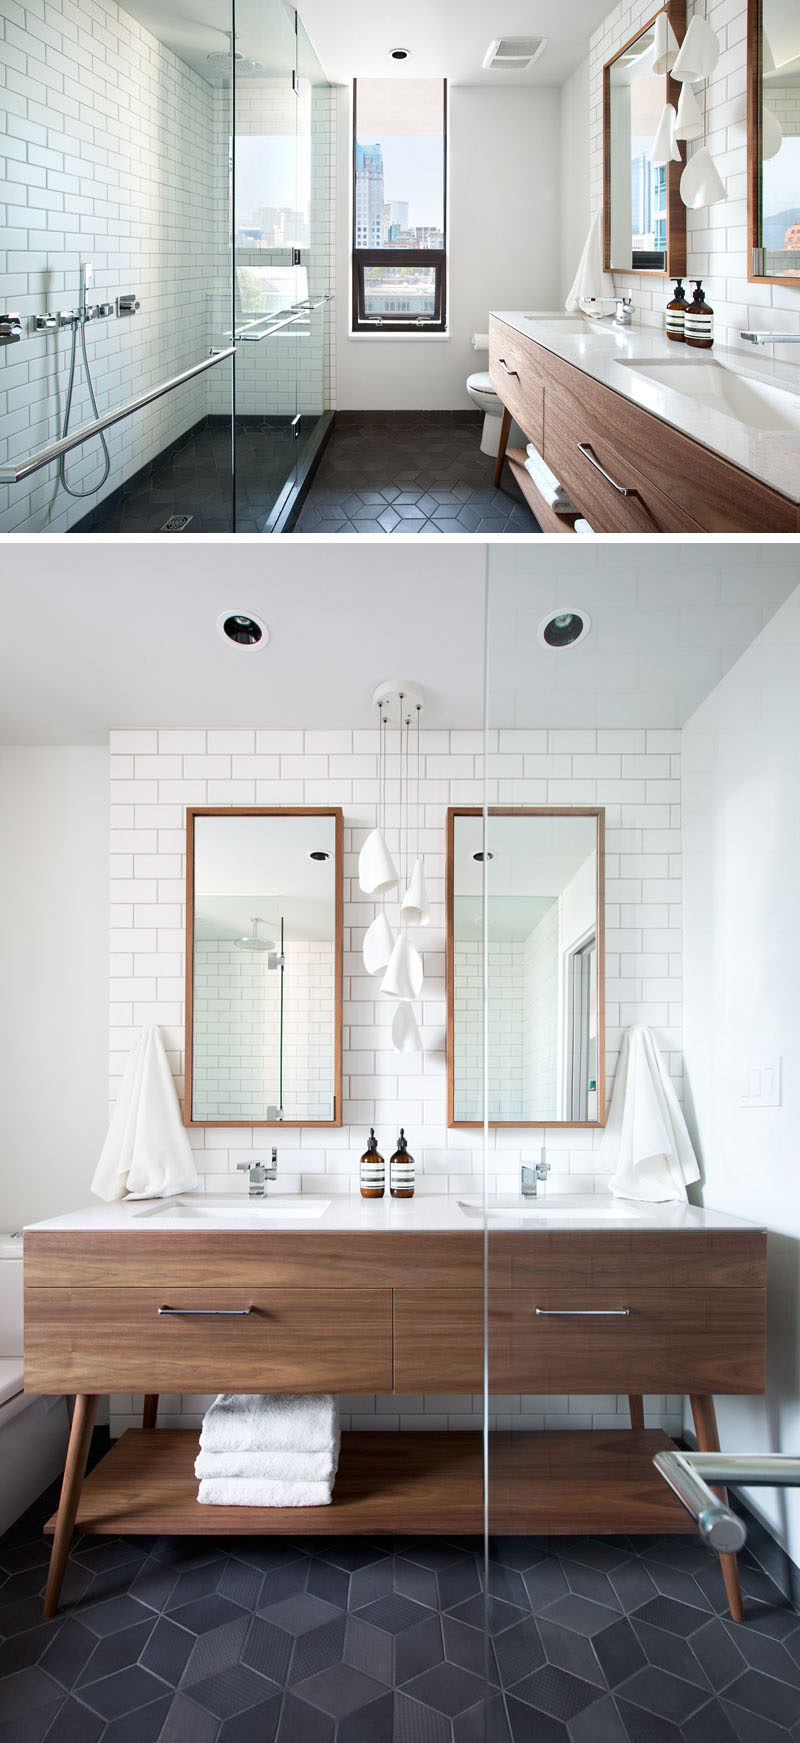 In this modern bathroom, a large glass enclosed shower takes up one wall, while a wood vanity with dual sinks and a white counter is featured on the opposite wall. White subway tiles have been used for the walls, and dark grey, geometric tiles have been used for flooring.